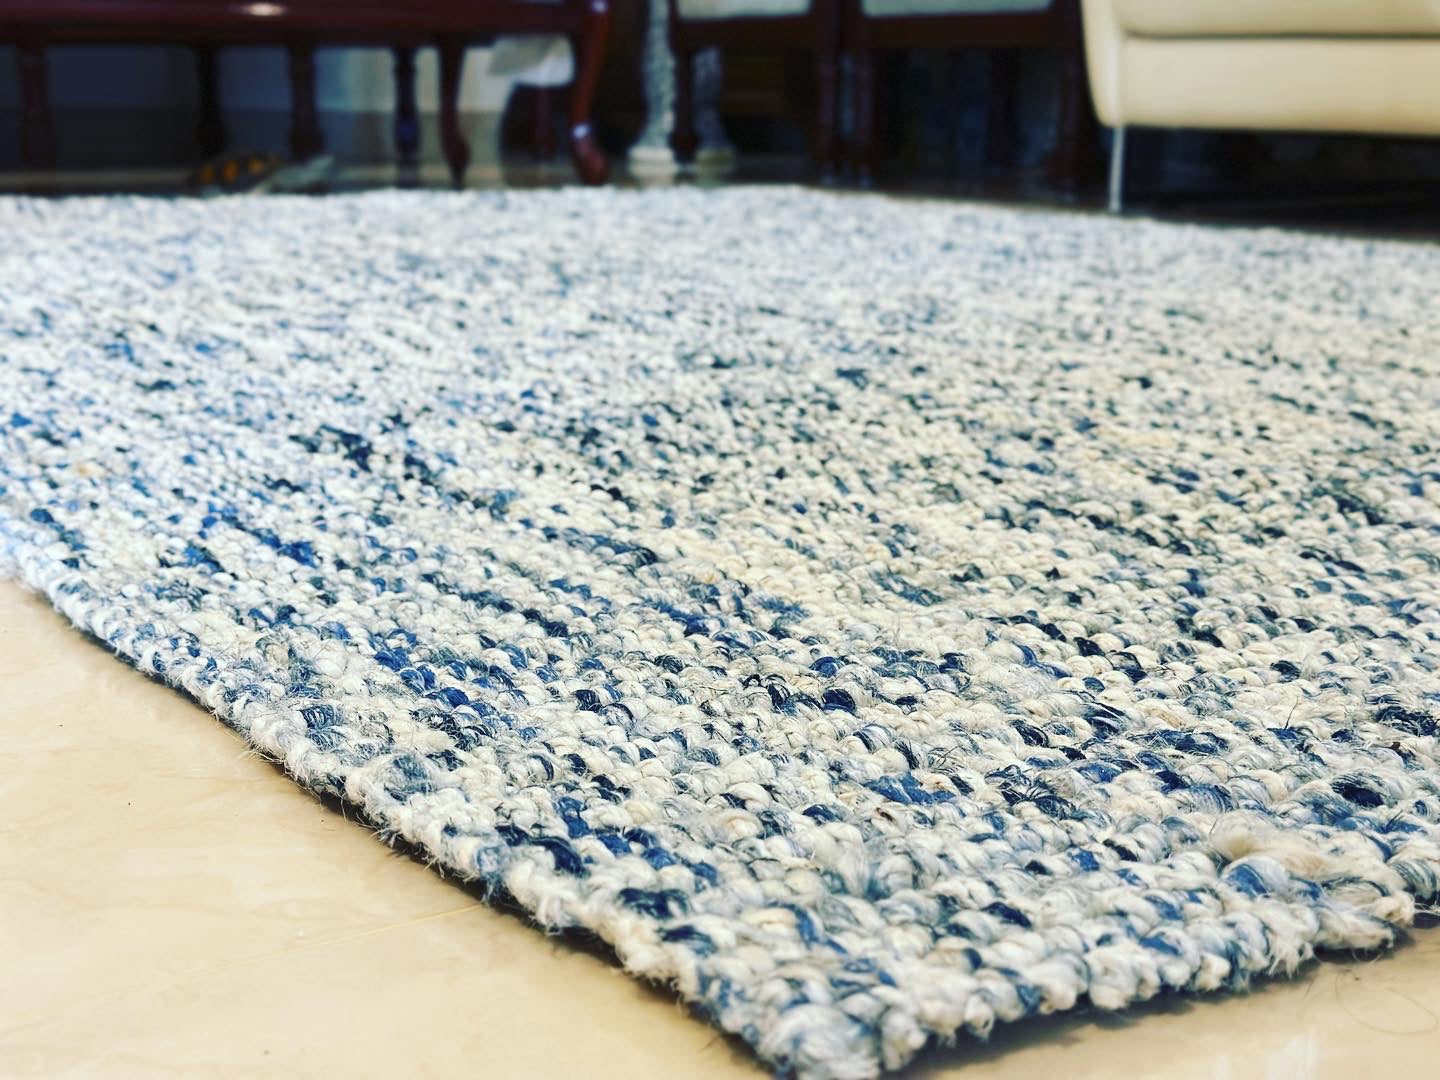 Blues Luxe Rug - Handwoven Jute Carpet - Tie and Dye Handwoven Jute Carpet with Blue and White Colours